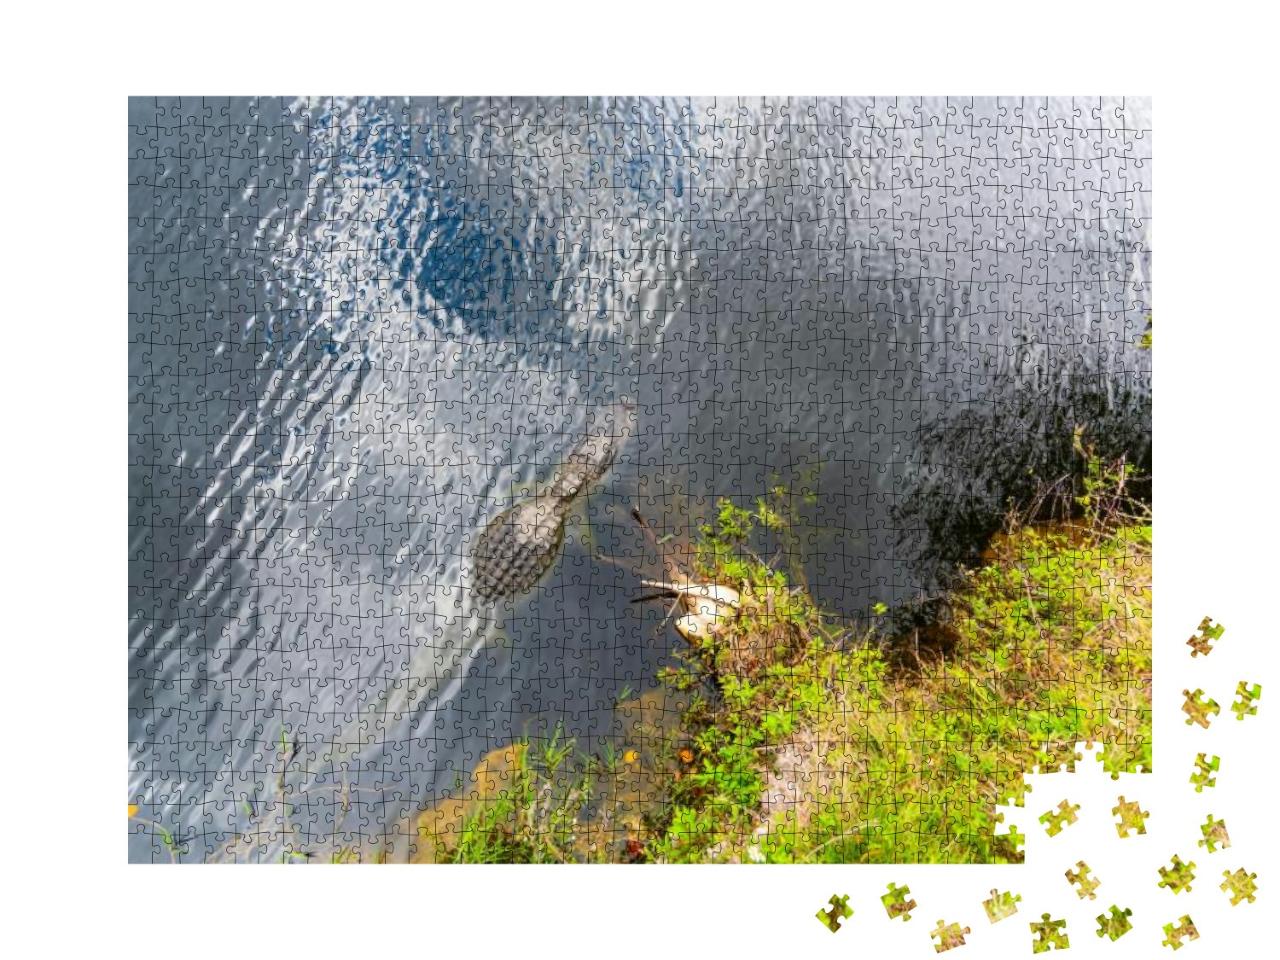 Alligator in the Everglades National Park Seen from Above... Jigsaw Puzzle with 1000 pieces